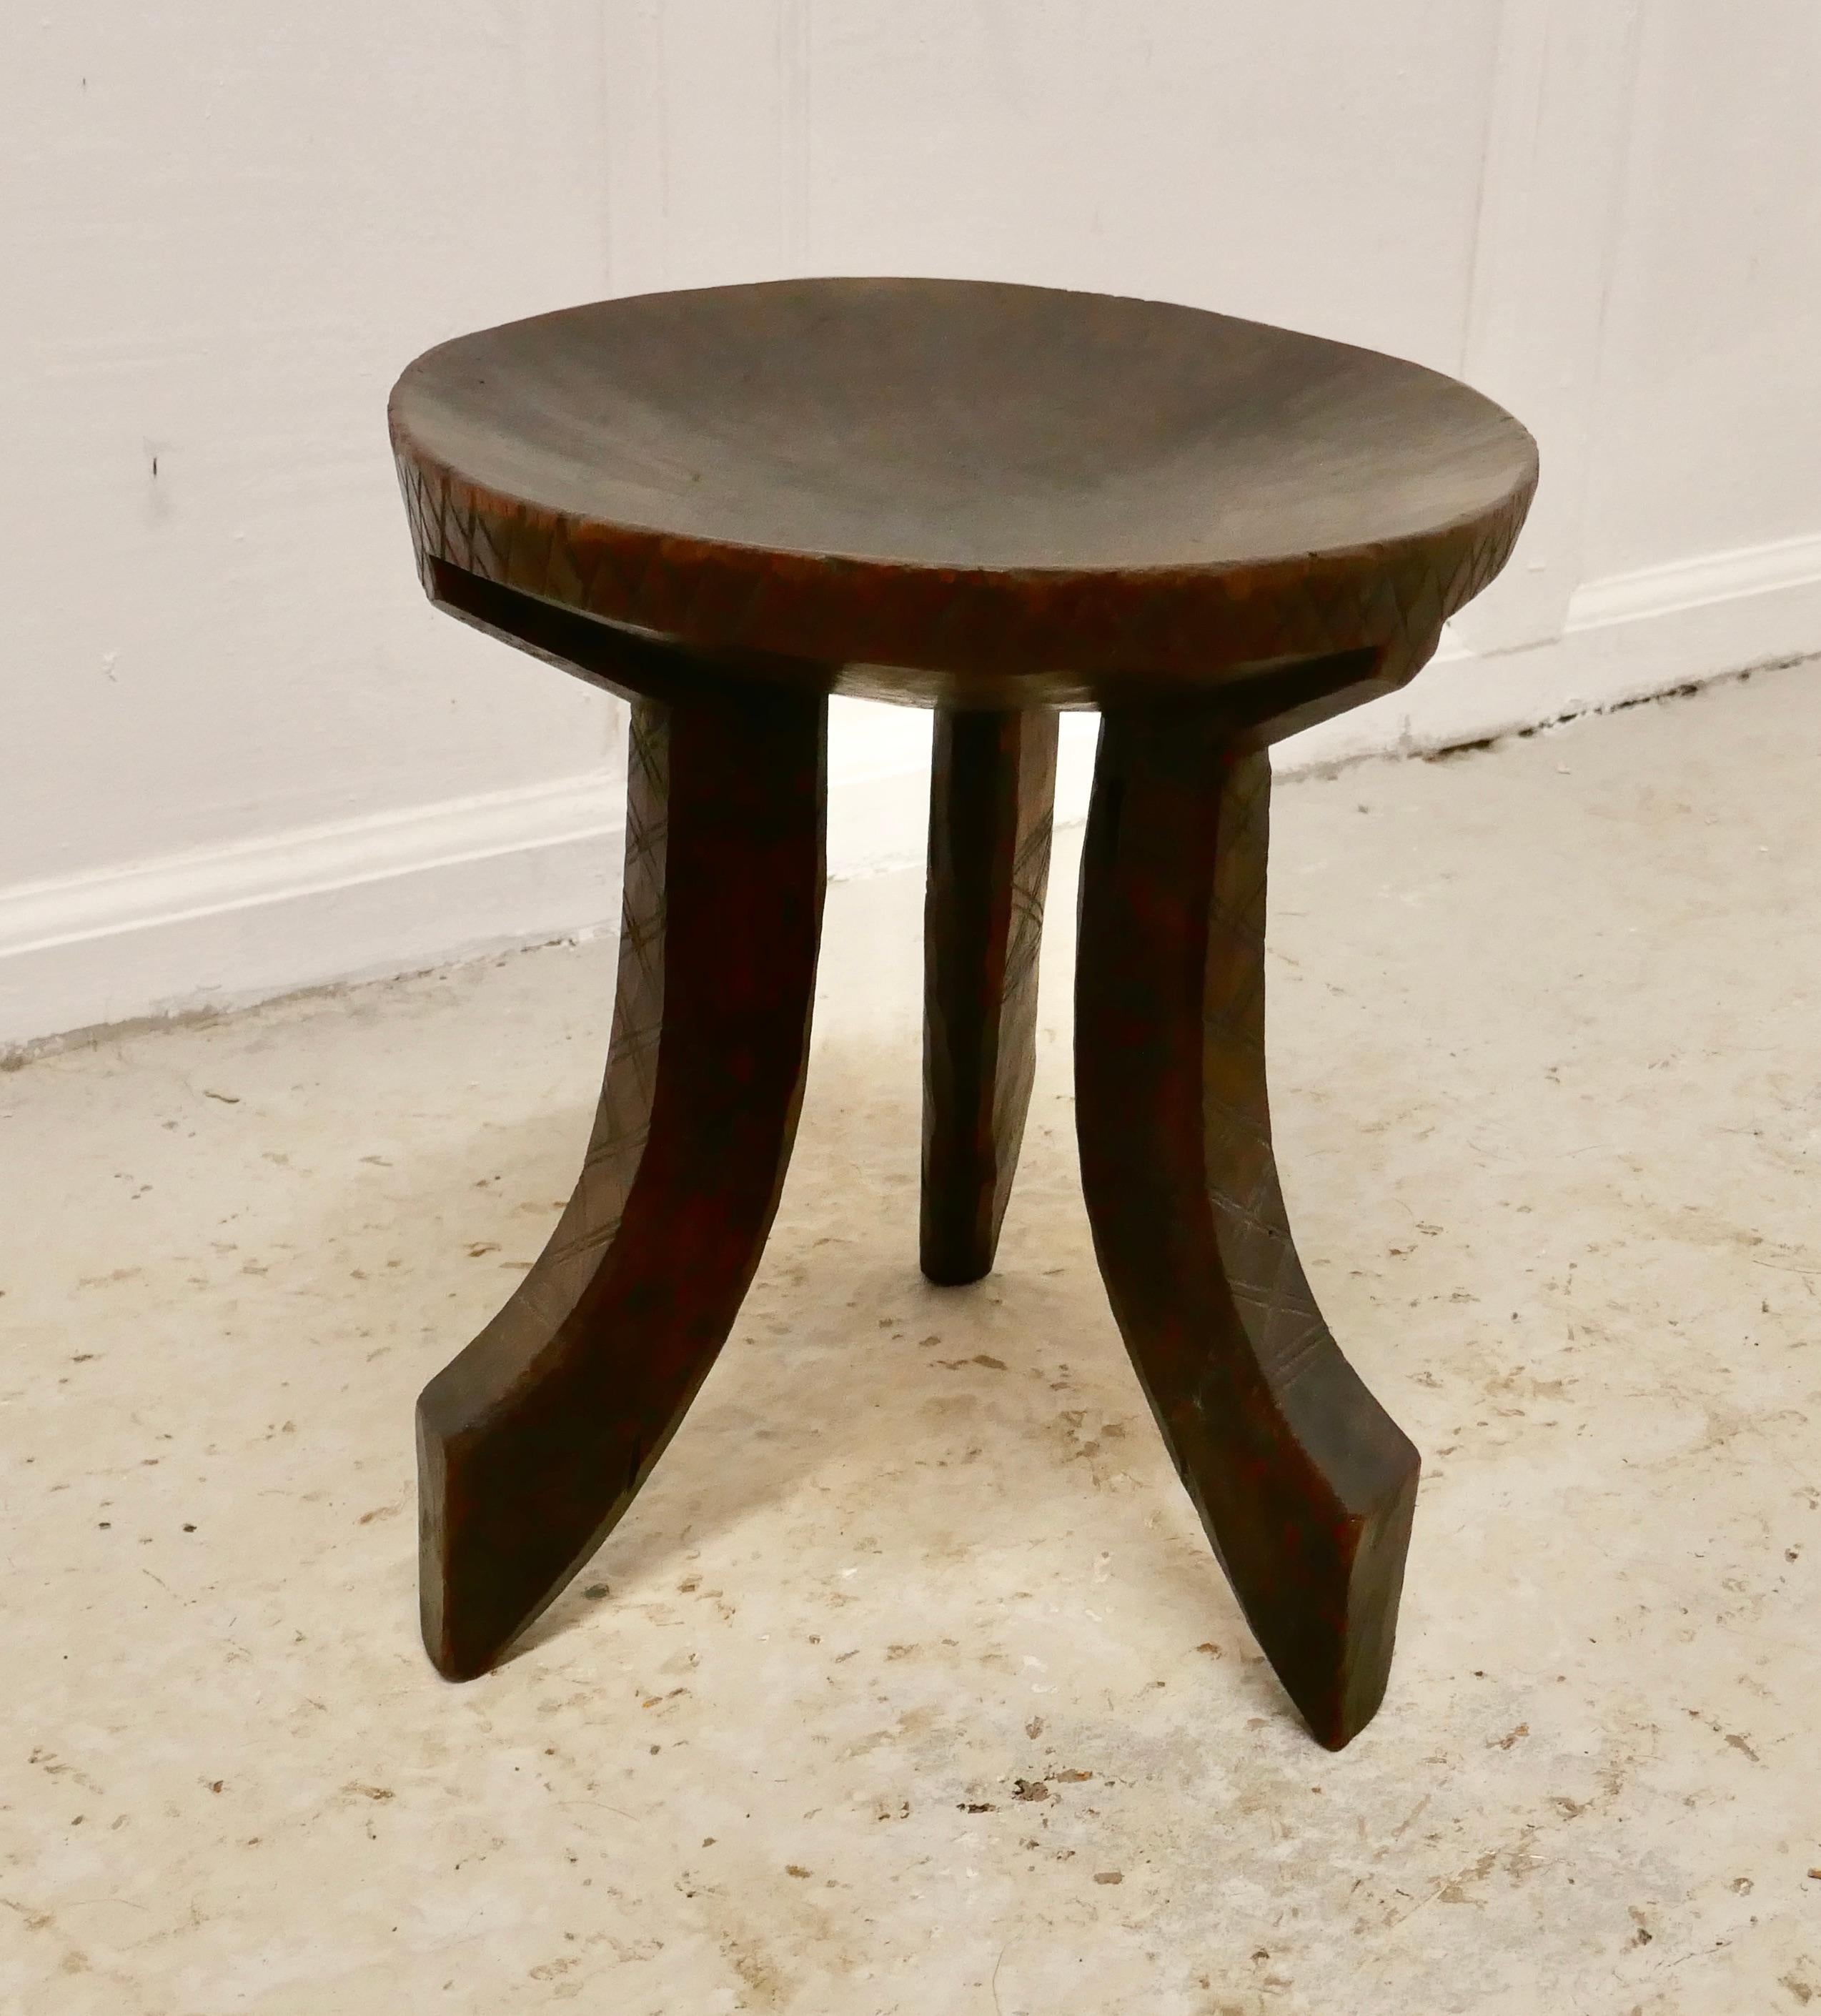 Carved solid wood African 3-legged stool

This lovely piece has been very skilfully carved out of one piece of wood, it has handsome dished seat, with 3 attractively shaped legs with decorative carving
The stool is 13” high and 12” in